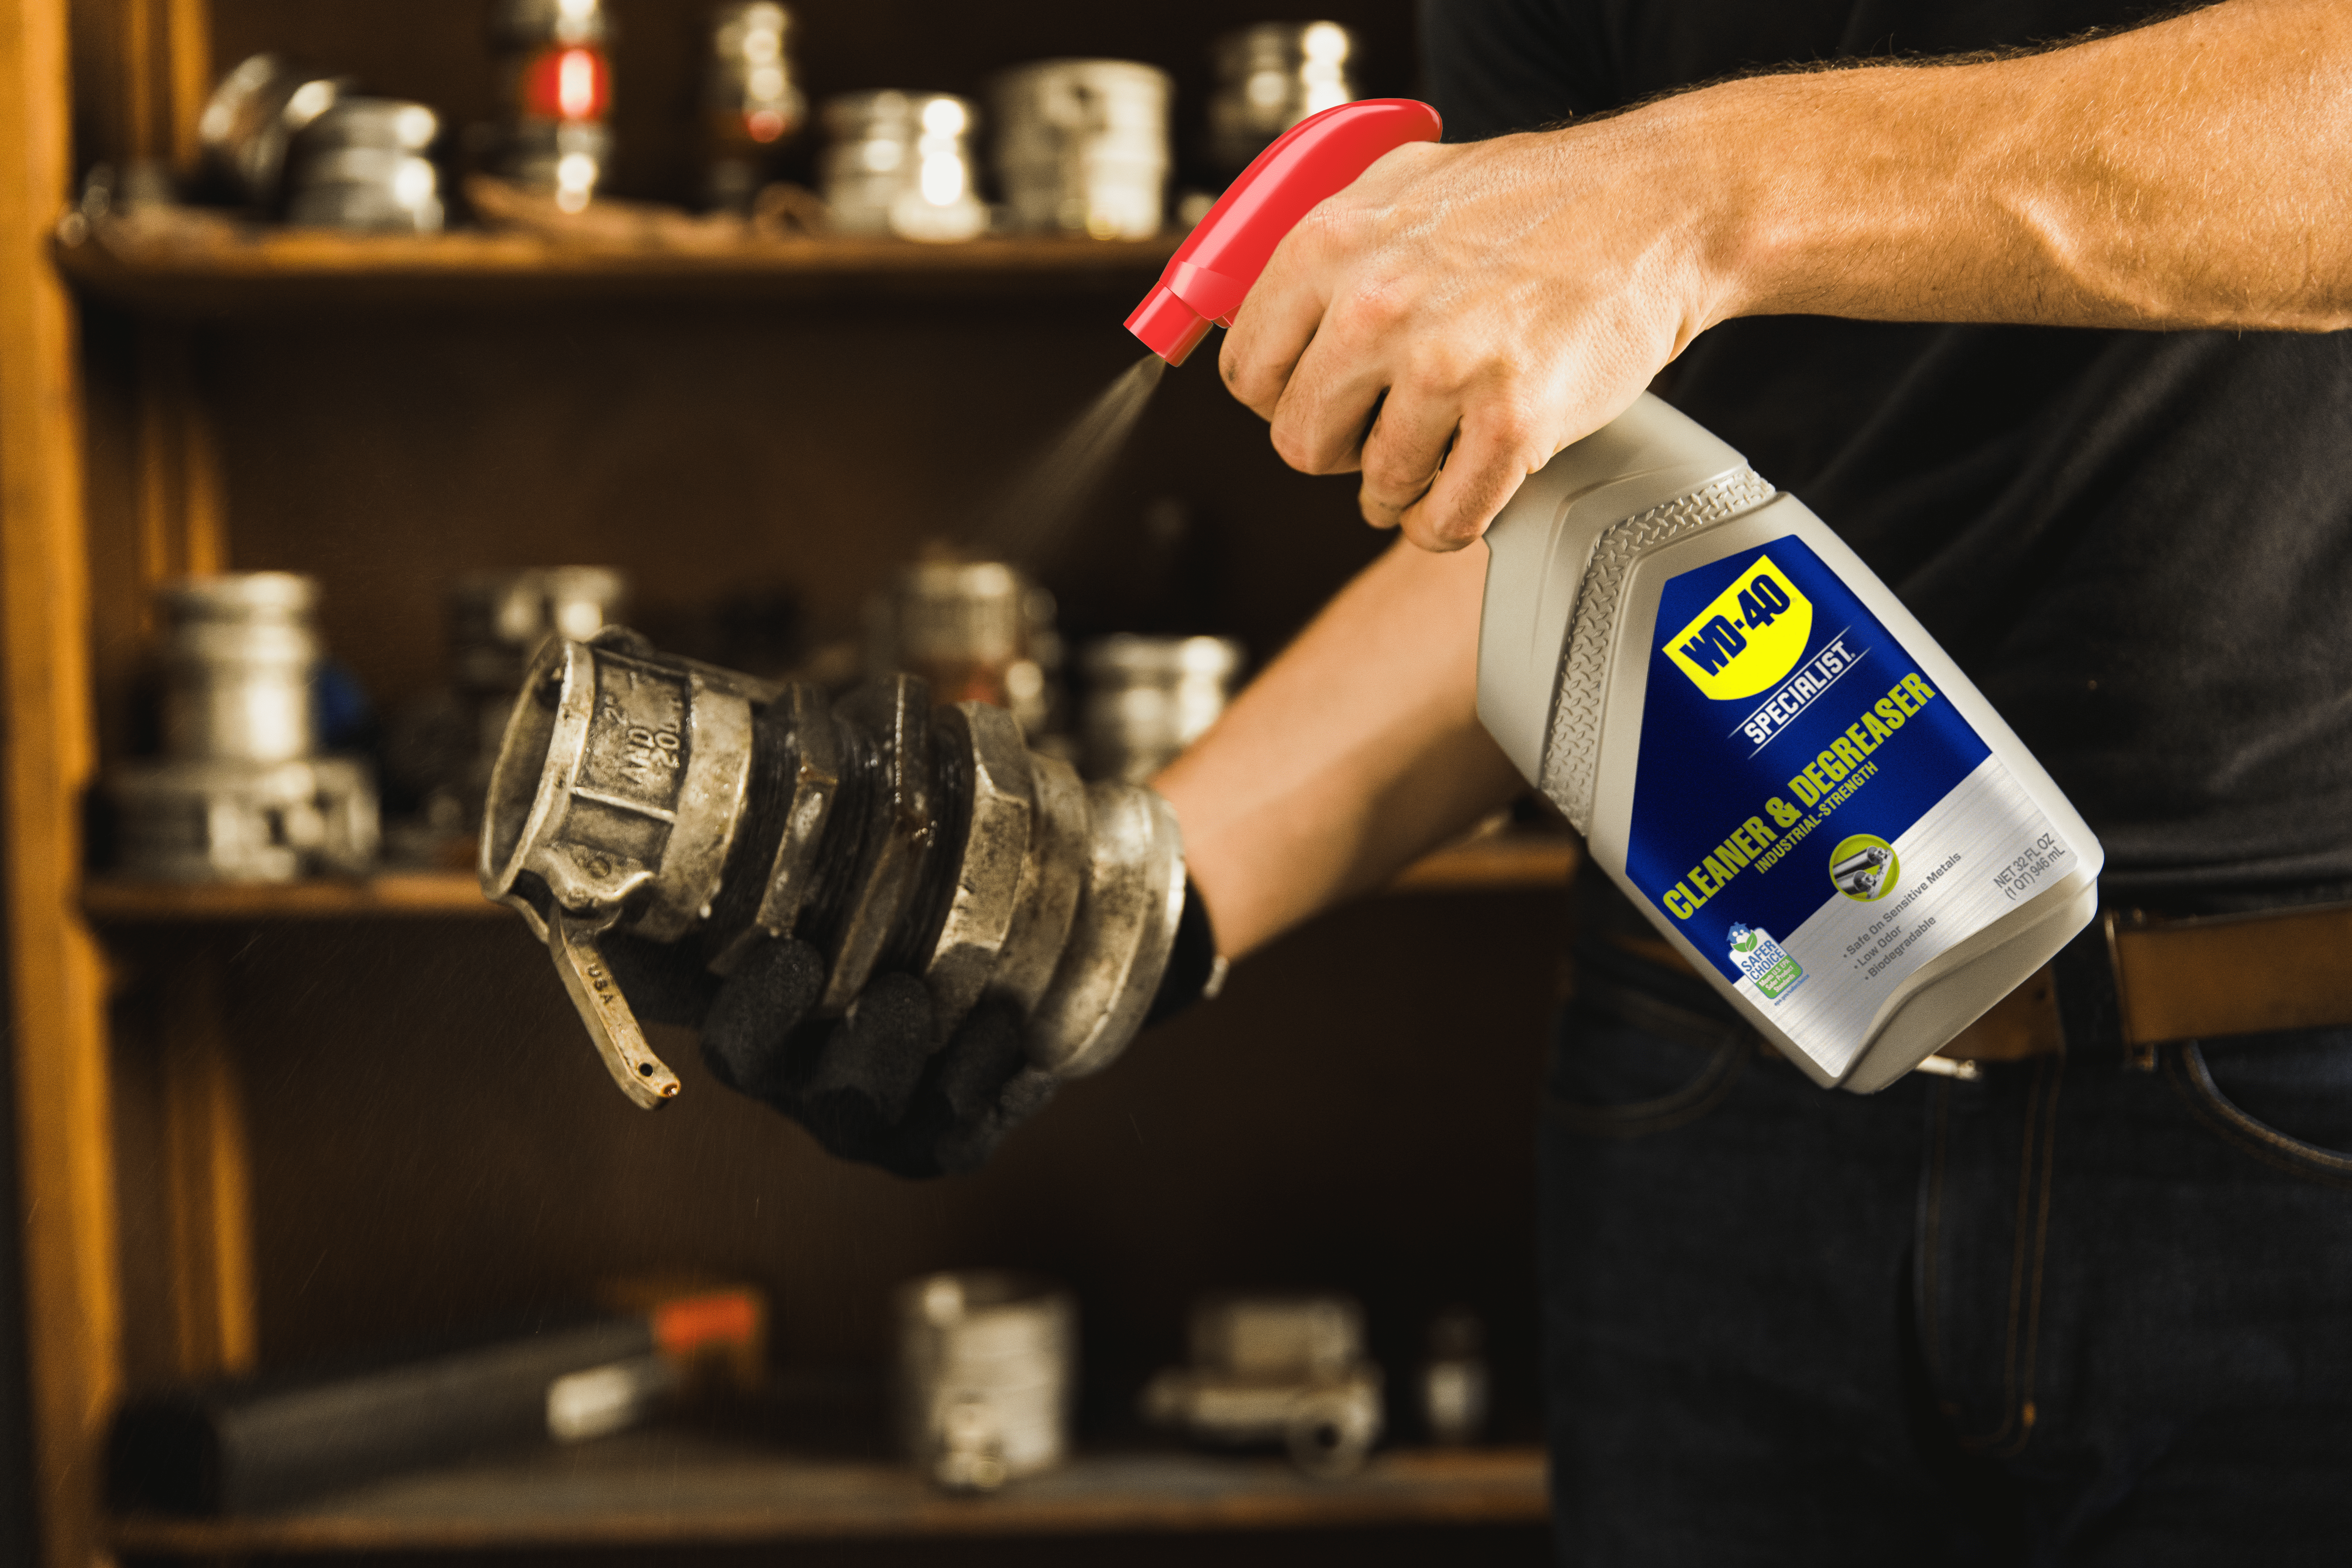 WD-40 WD40-31392 Specialist Universal Cleaning Spray 500ml